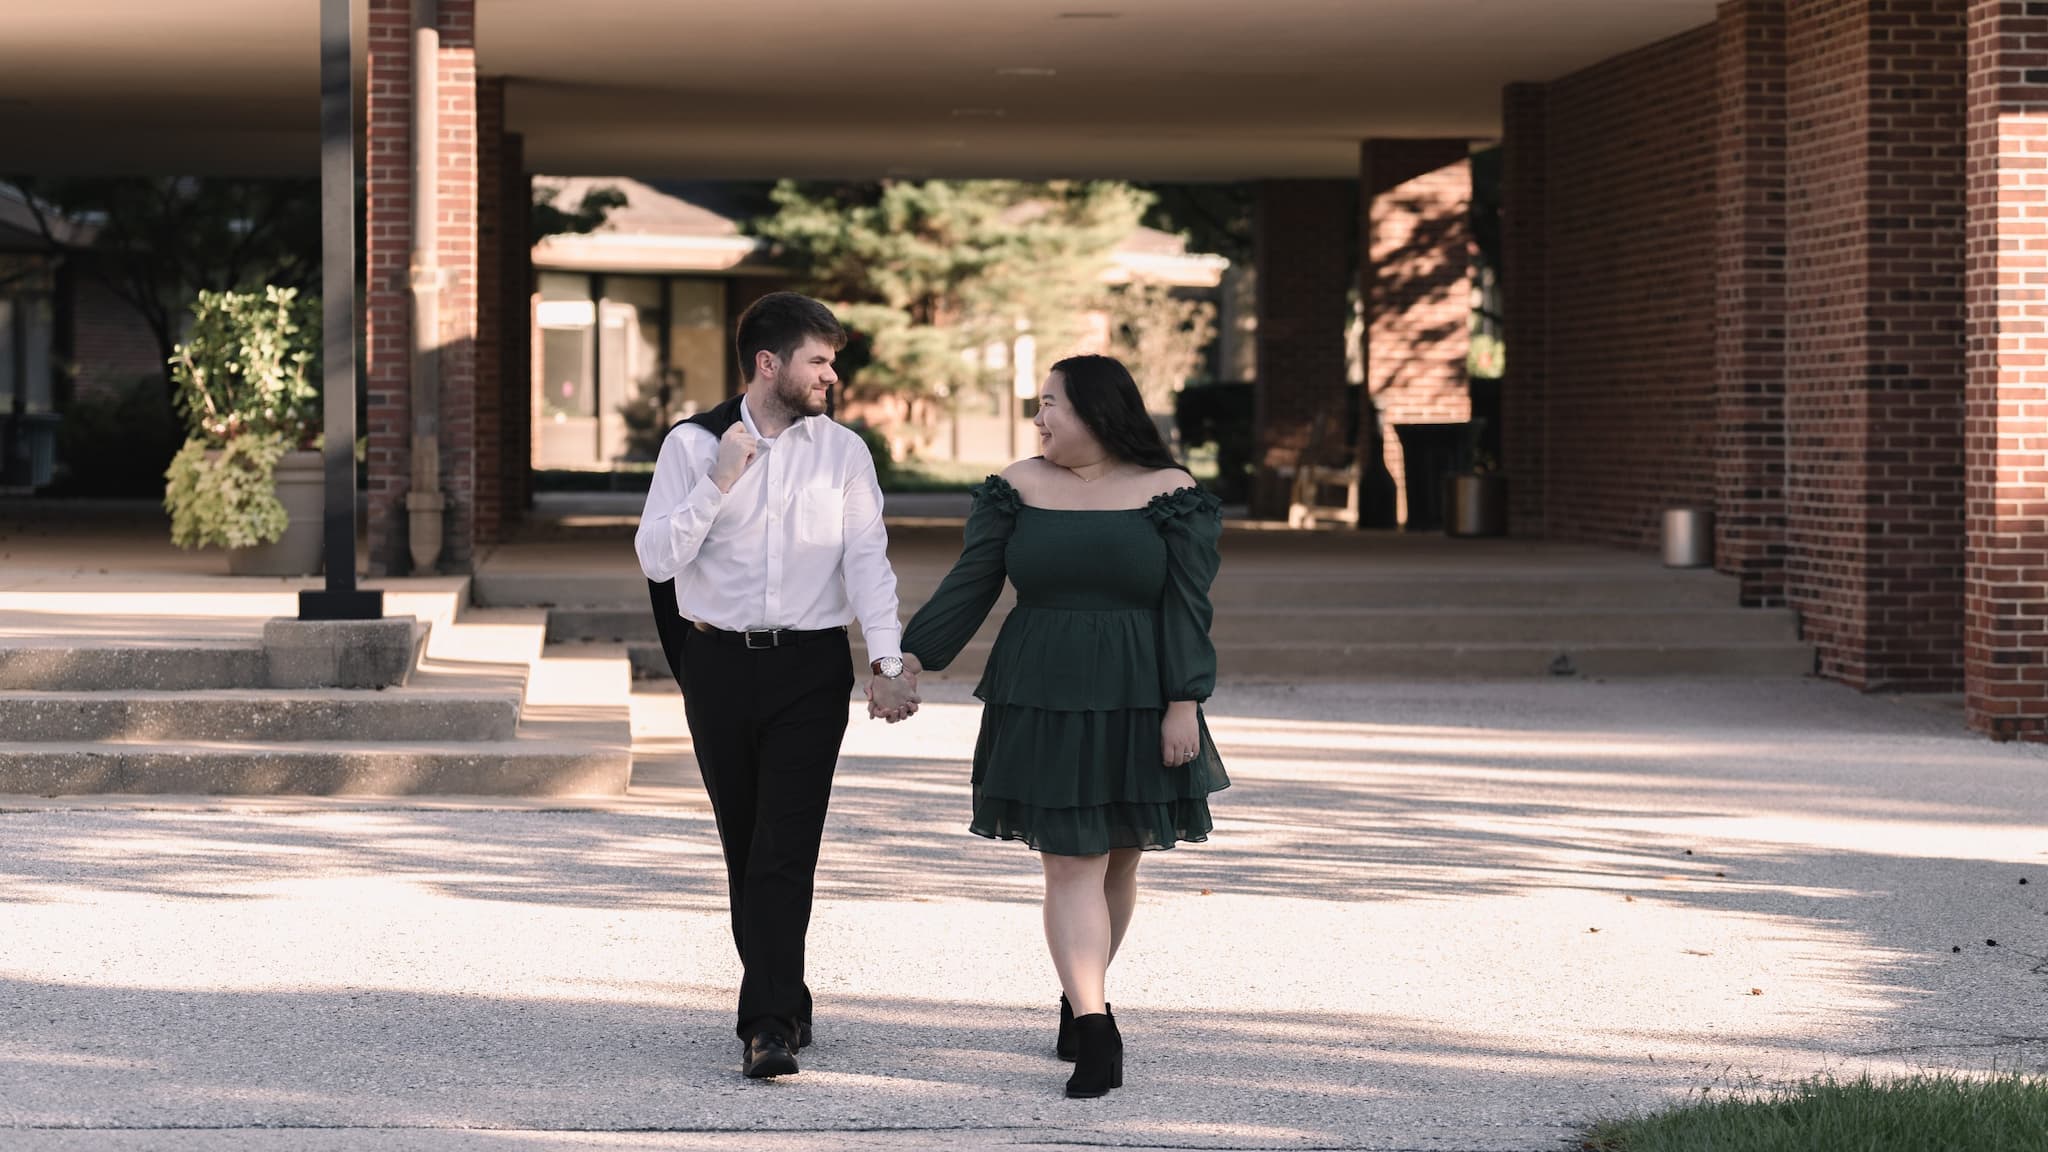 Yina & Norman | Engagement Session at Stevenson University in Owings Mills, MD